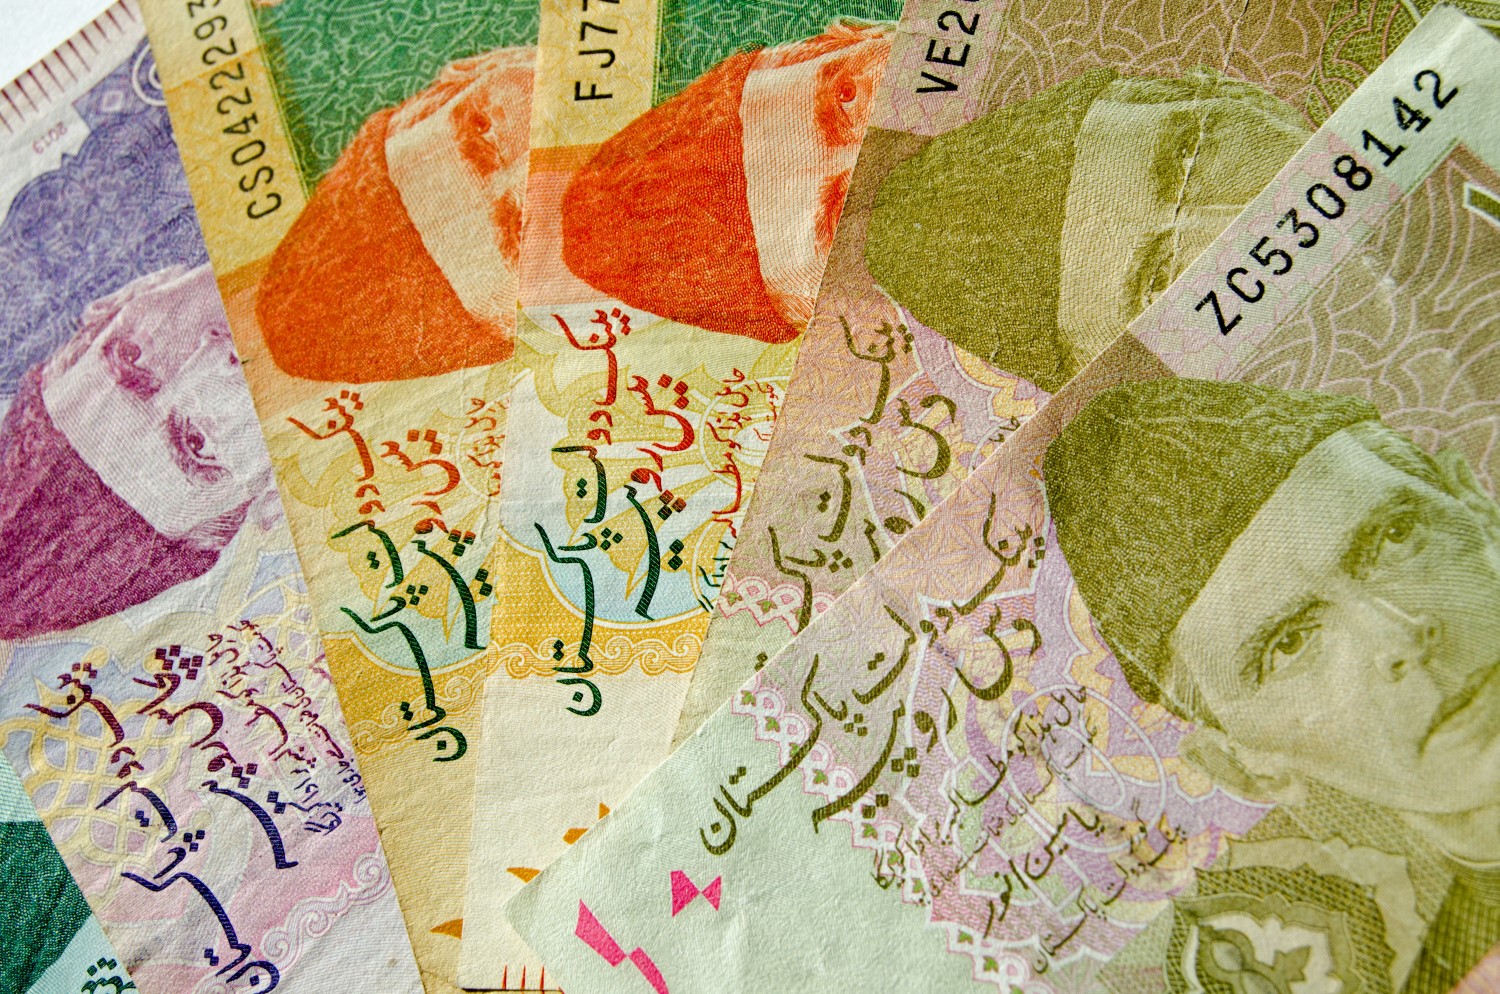 Pakistani Bank Teams With Alipay For Blockchain Remittances